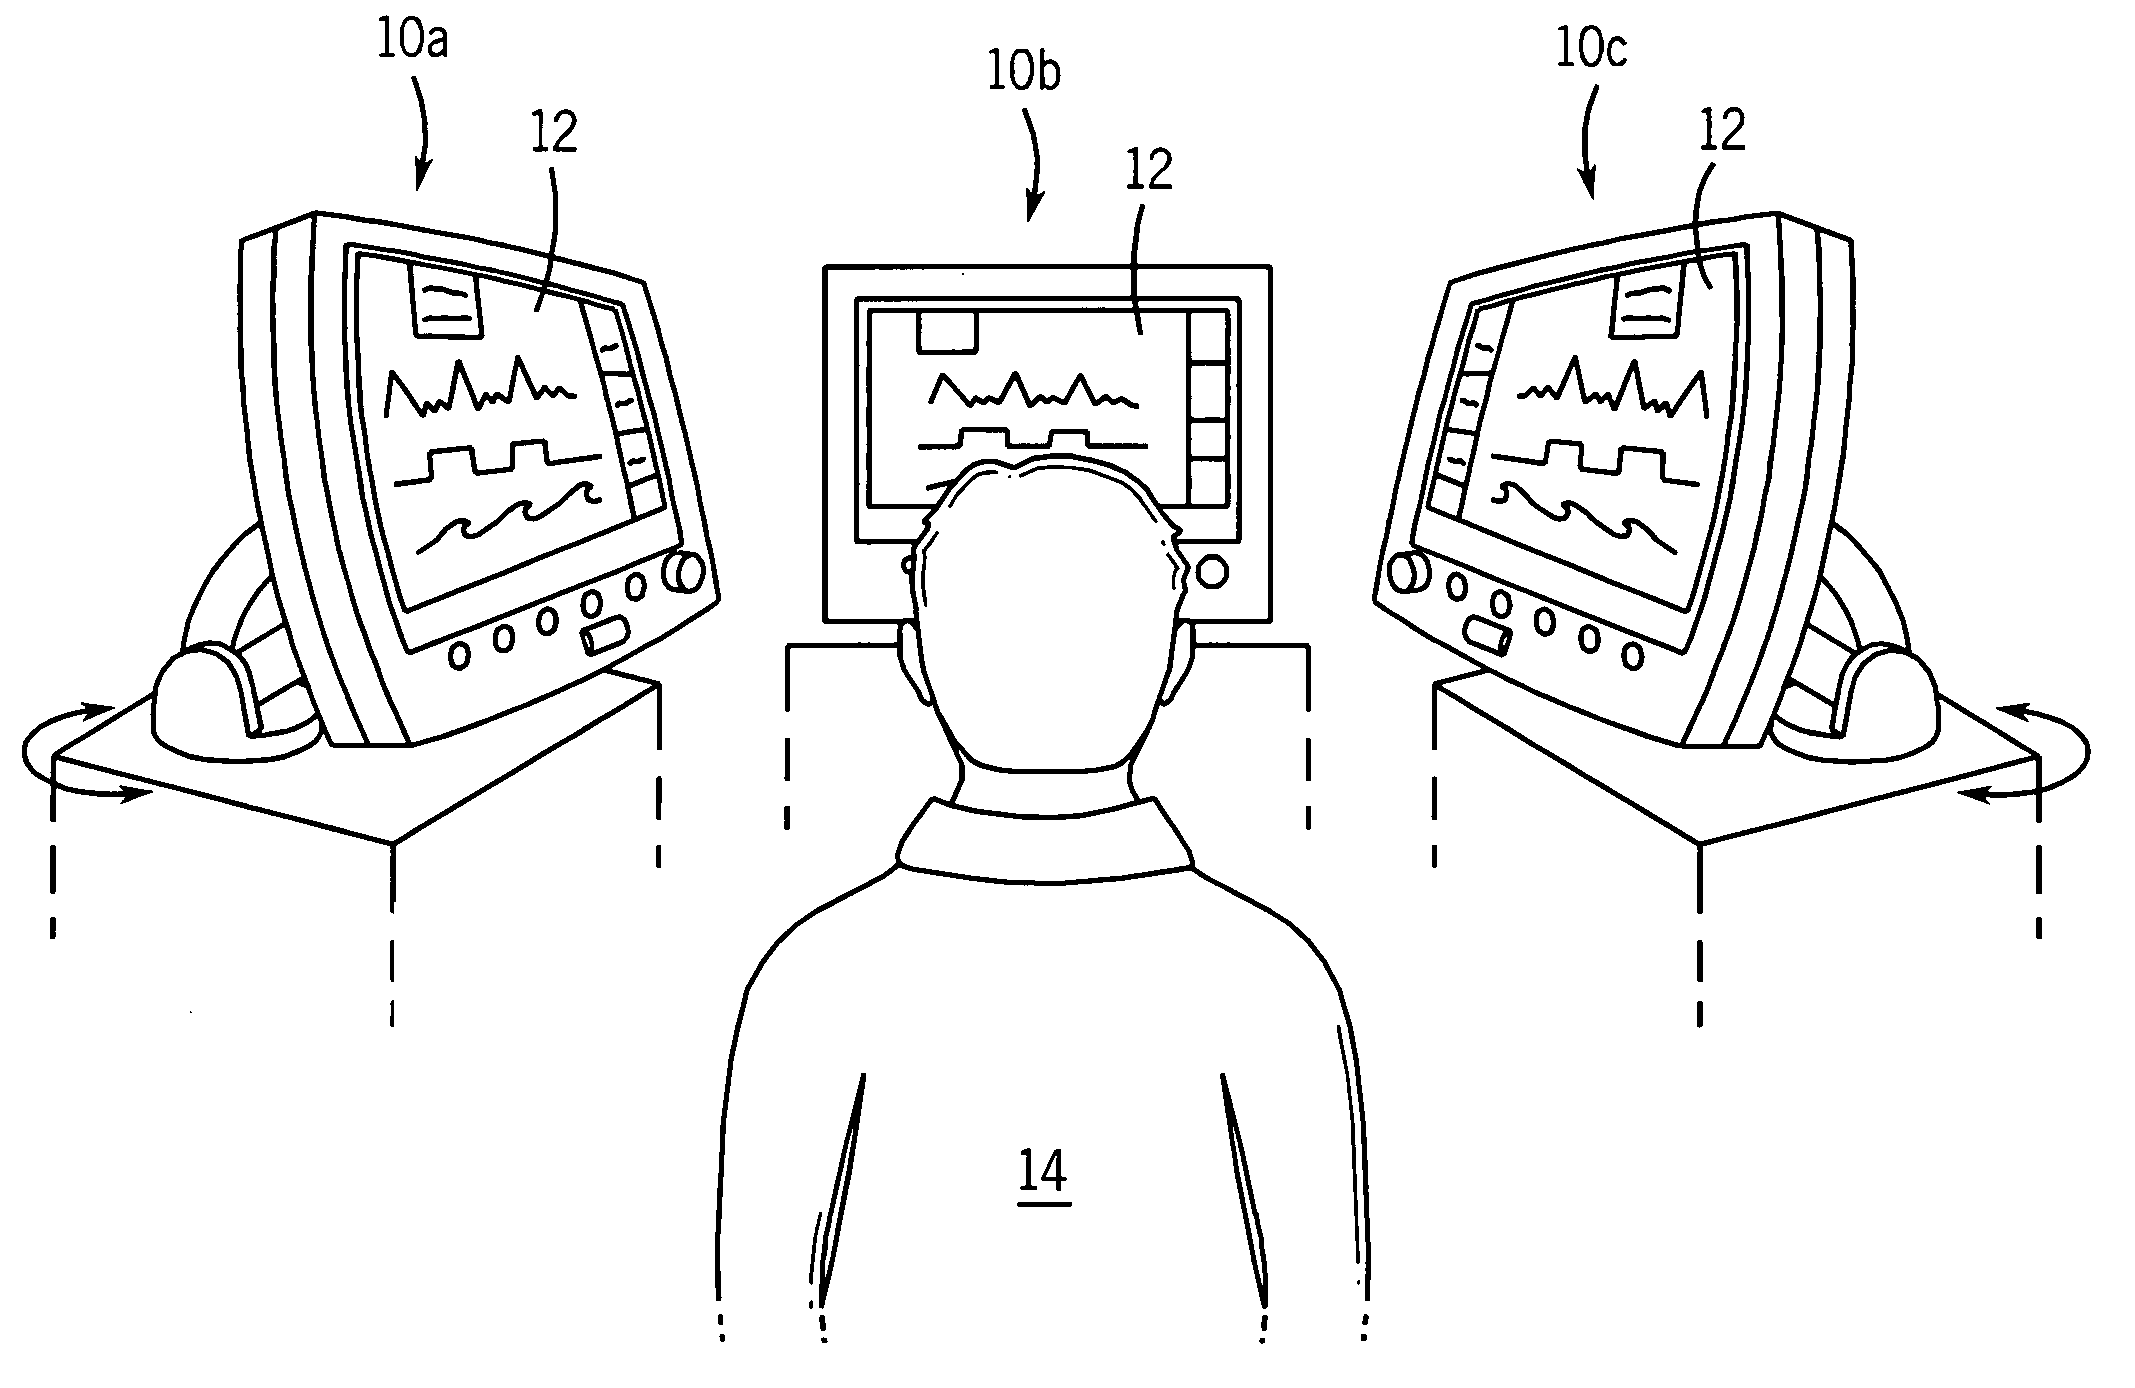 System and method for automatically adjusting medical displays